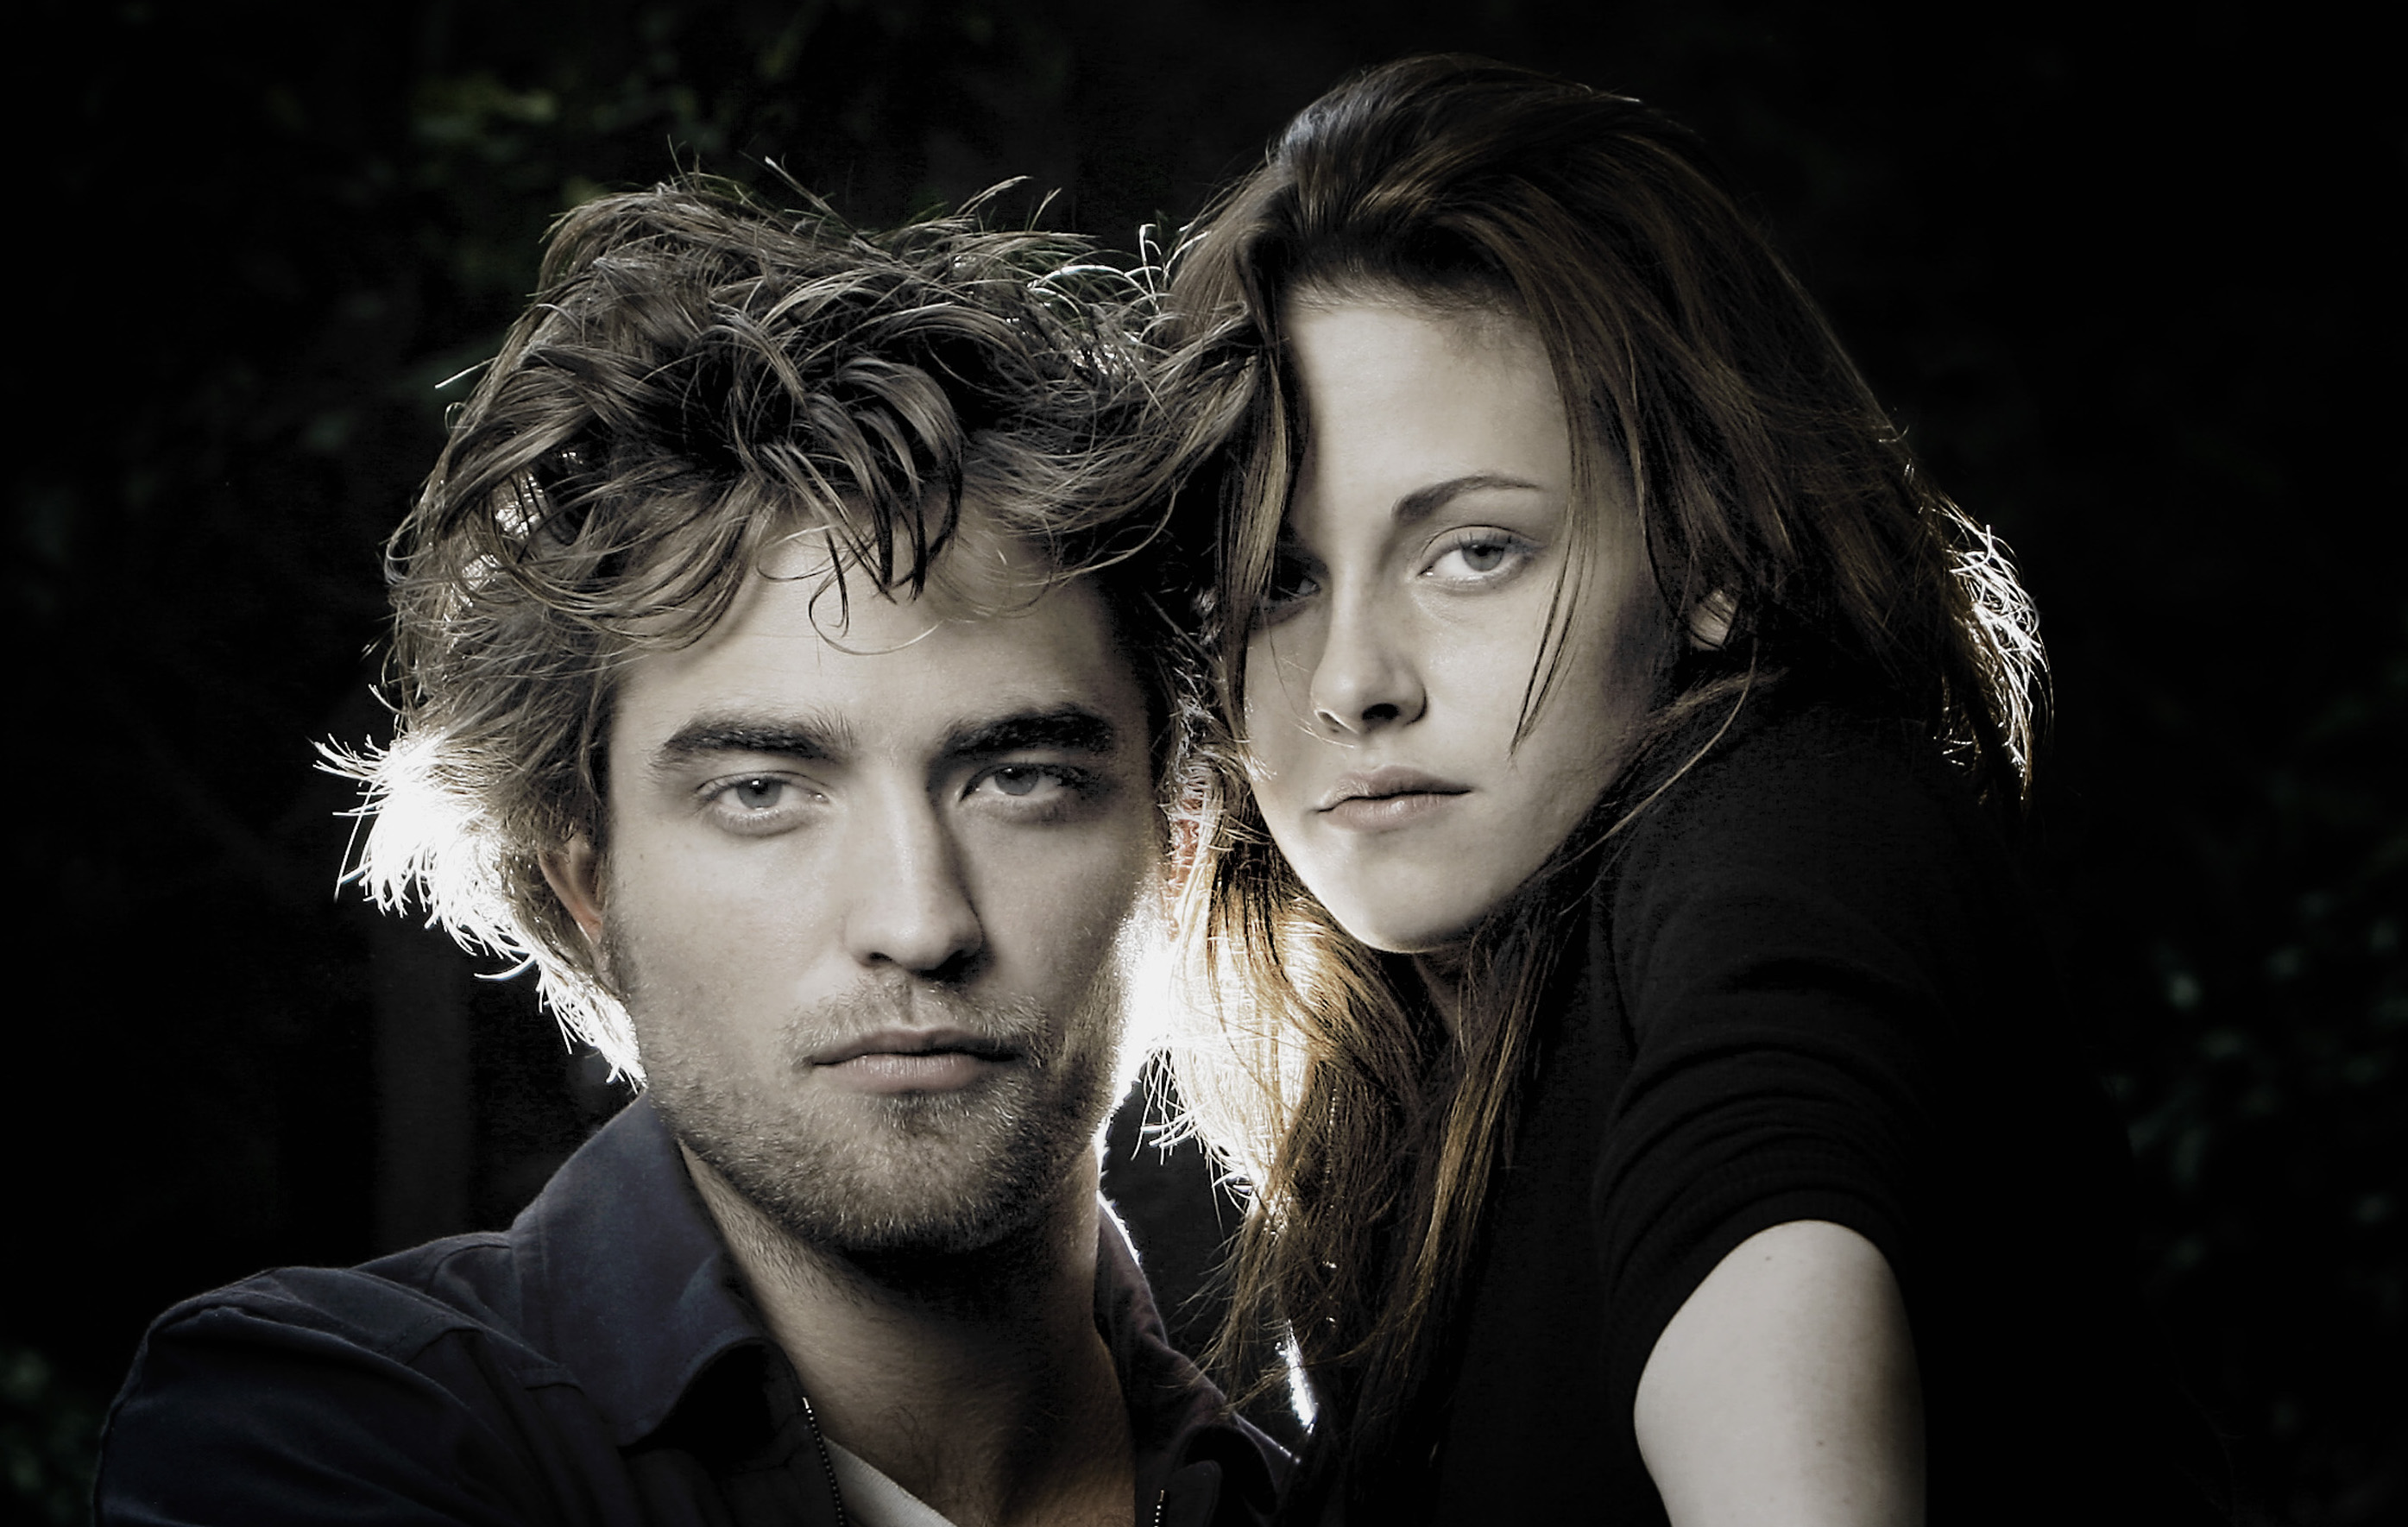 Robert Pattinson and Kristen Stewart Might Get Back Together After All